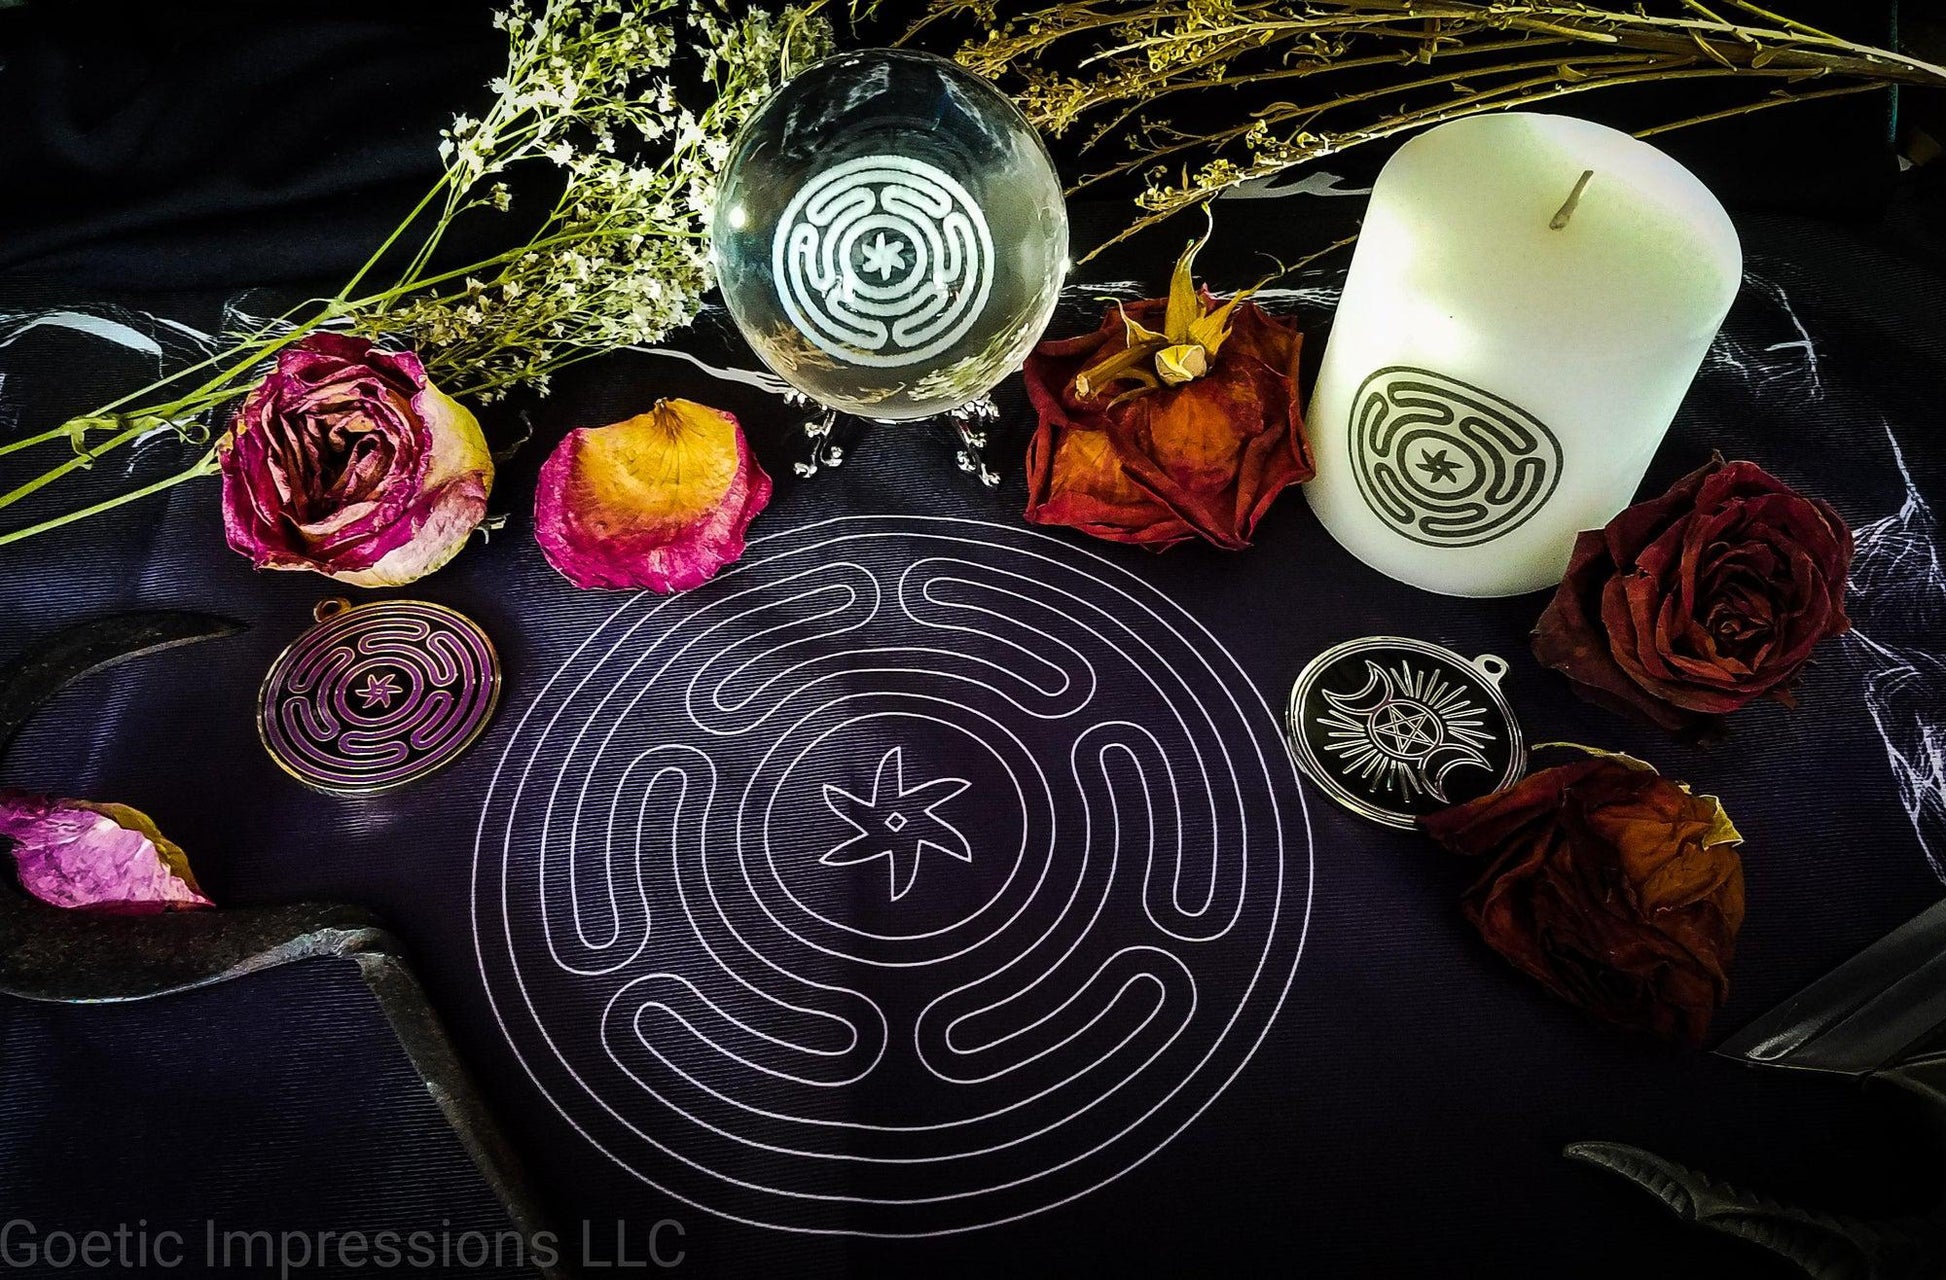 Hekate altar featuring crystal ball, talismans, candles and altar cloth